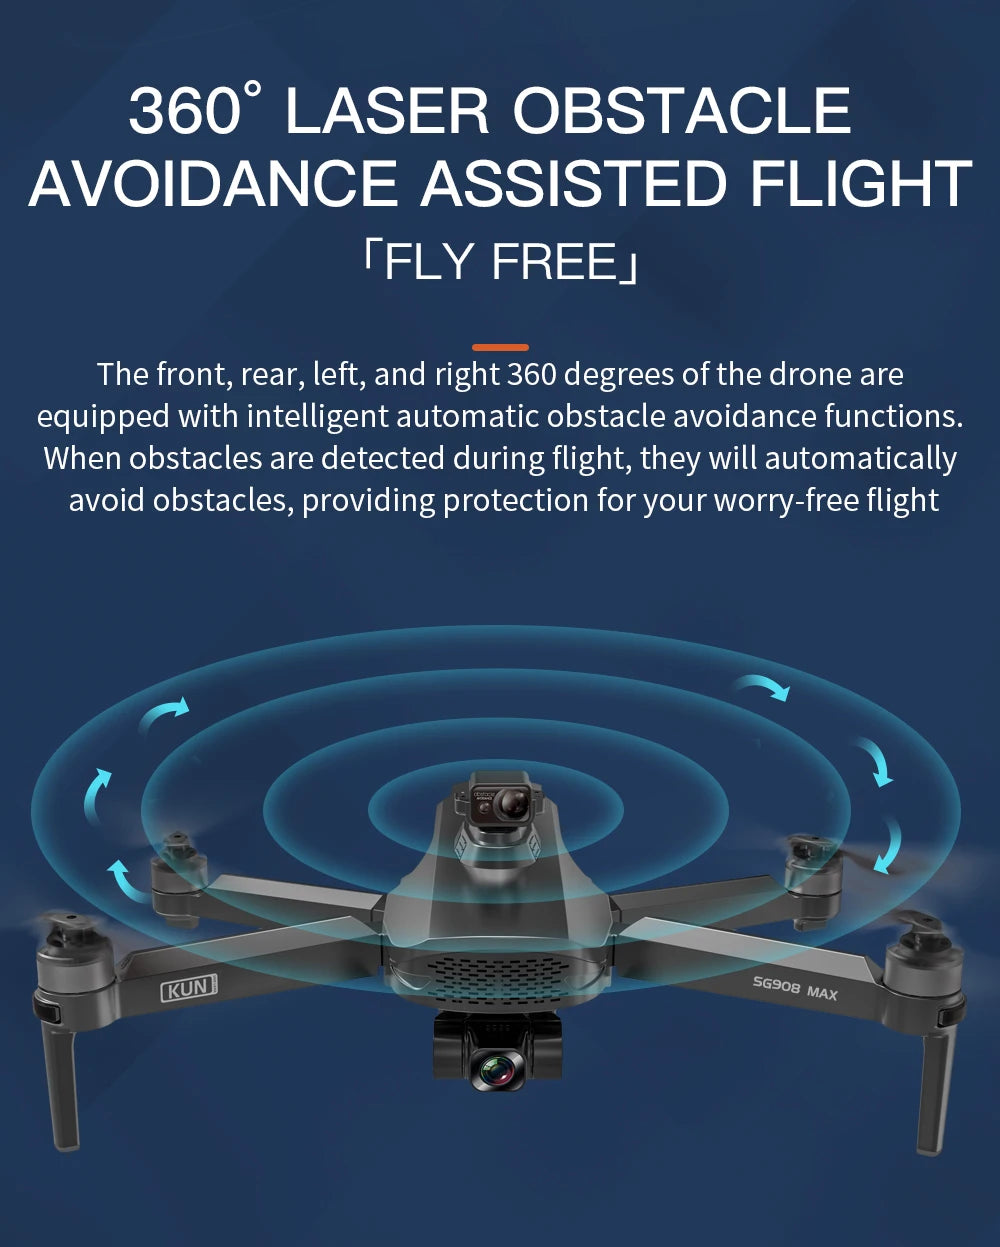 ZLL SG908 MAX Drone, the front, rear, left, and right 360 degrees of the drone are equipped with intelligent automatic